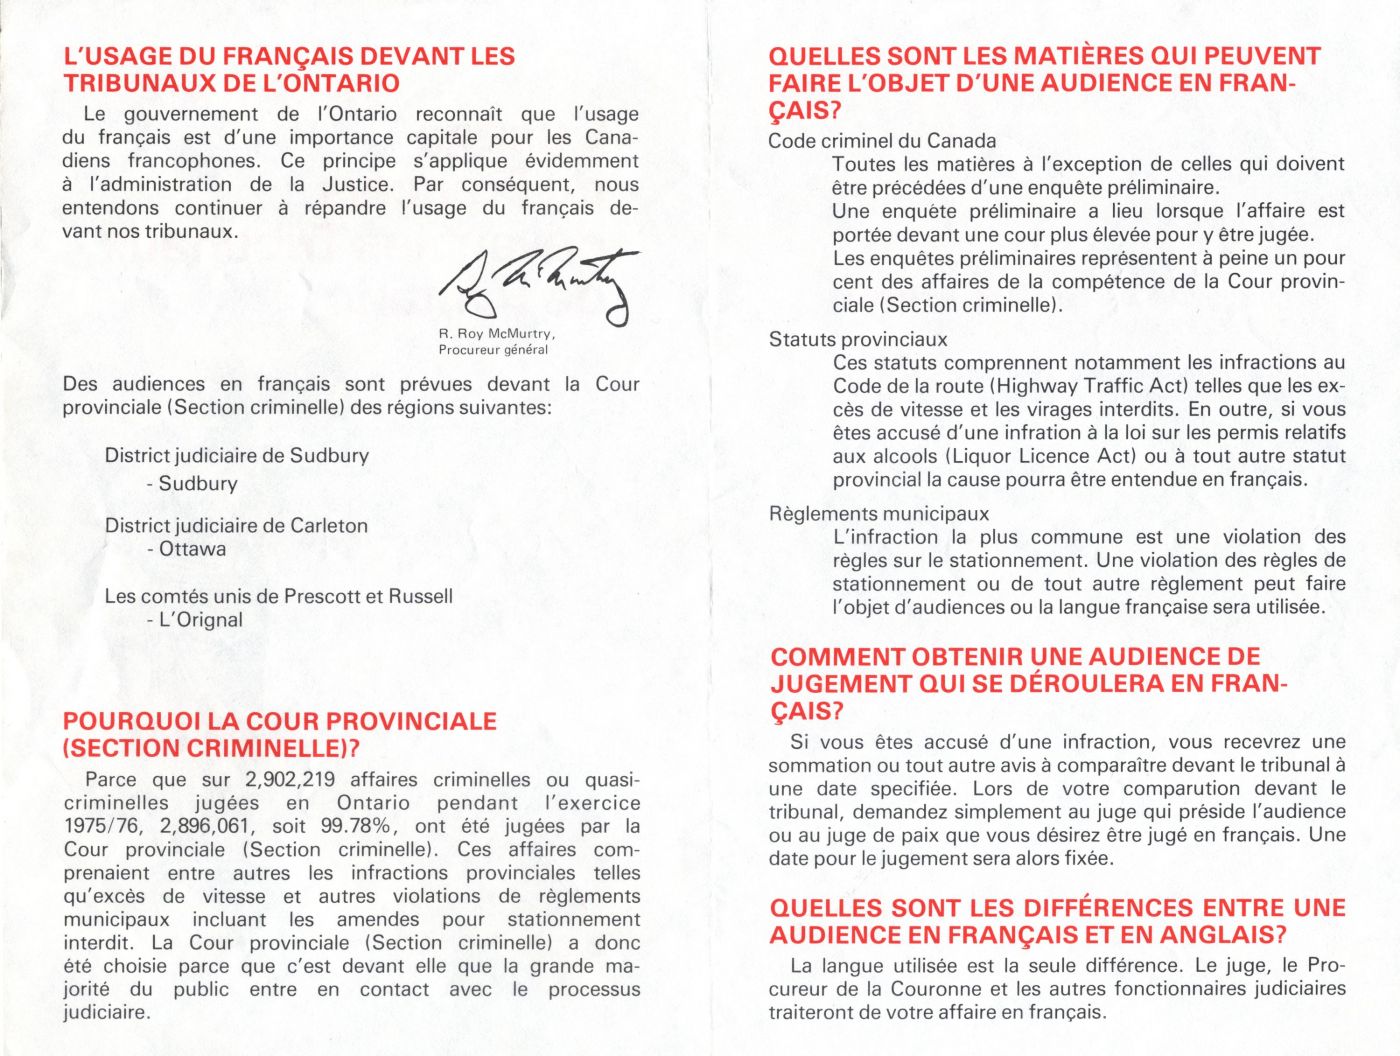 French pamphlet, divided into four parts. On the cover, the title of the document, its source, and a drawing of Justice. On the front, information elements grouped under five headings; on the back, instructions for more information. Alternating between red and black.